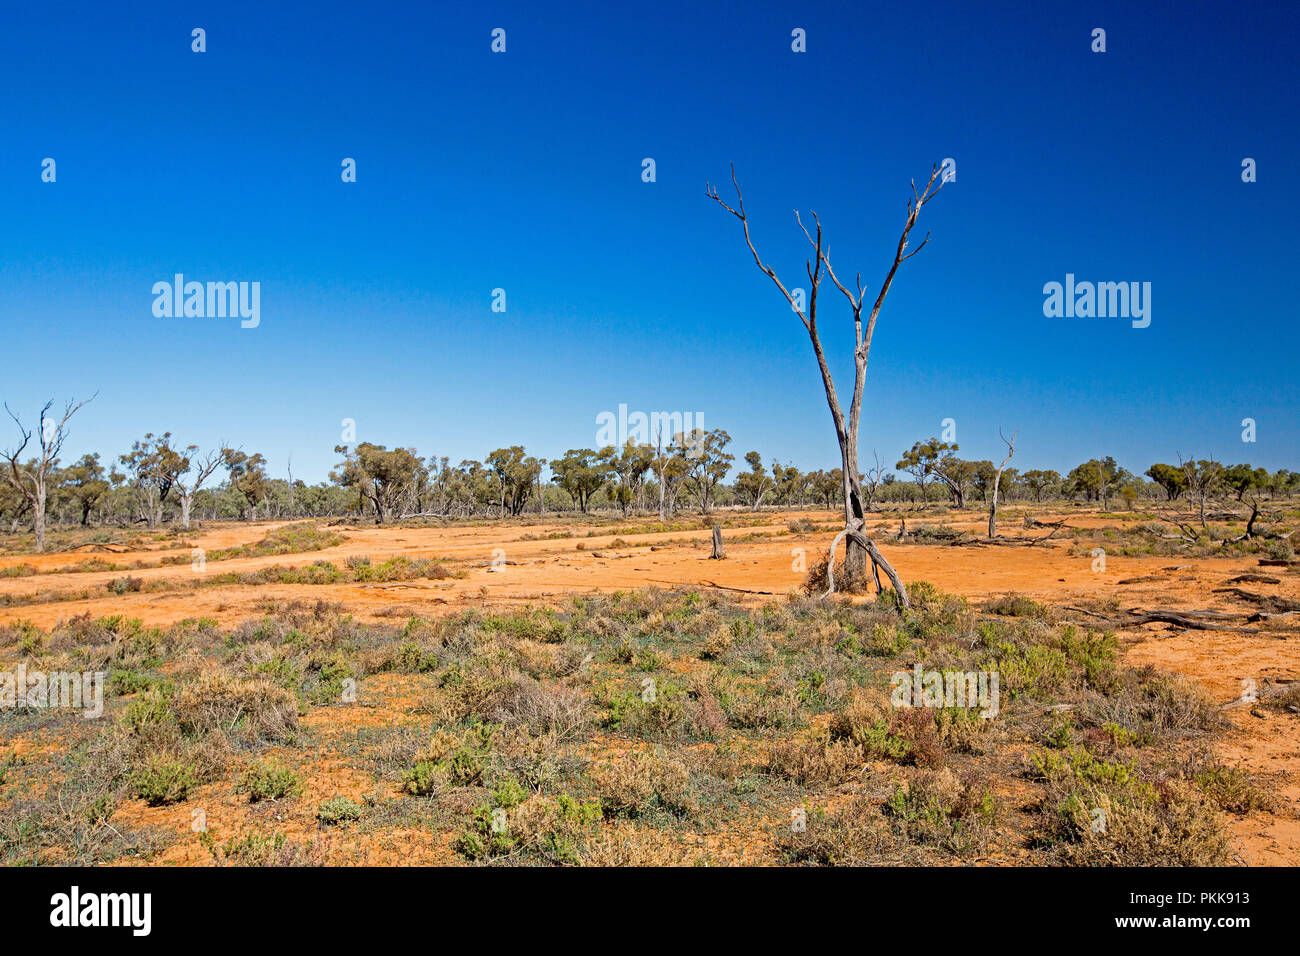 Australian outback landscape with tufts and vegetation and low trees rising from arid red plains under blue sky in NSW Stock Photo